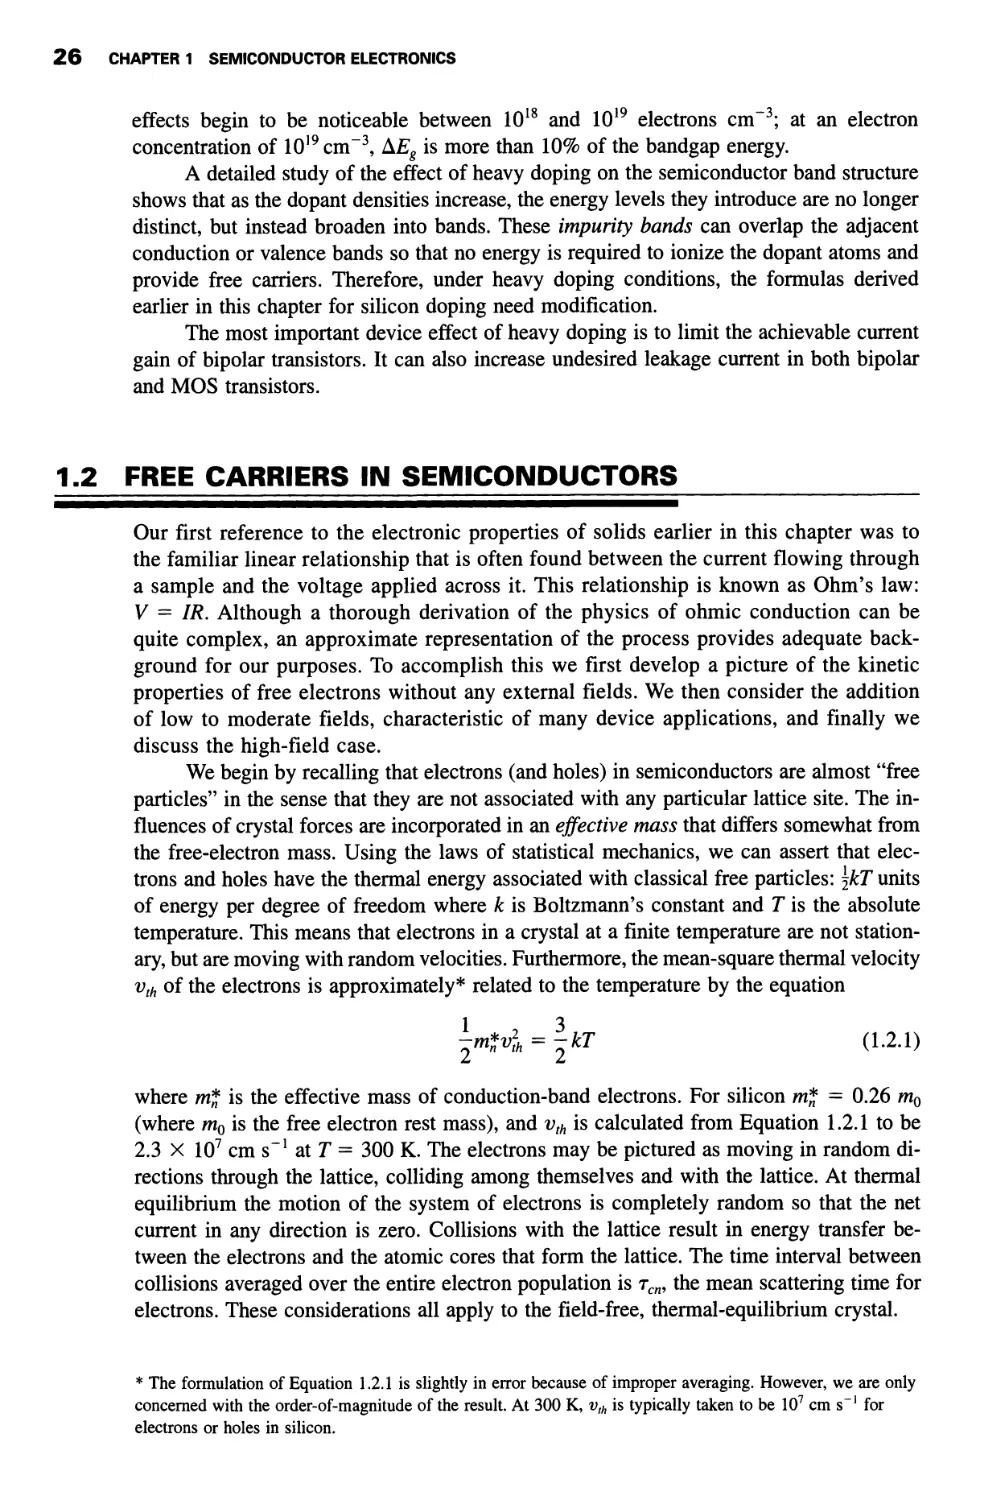 1.2 Free Carriers in Semiconductors